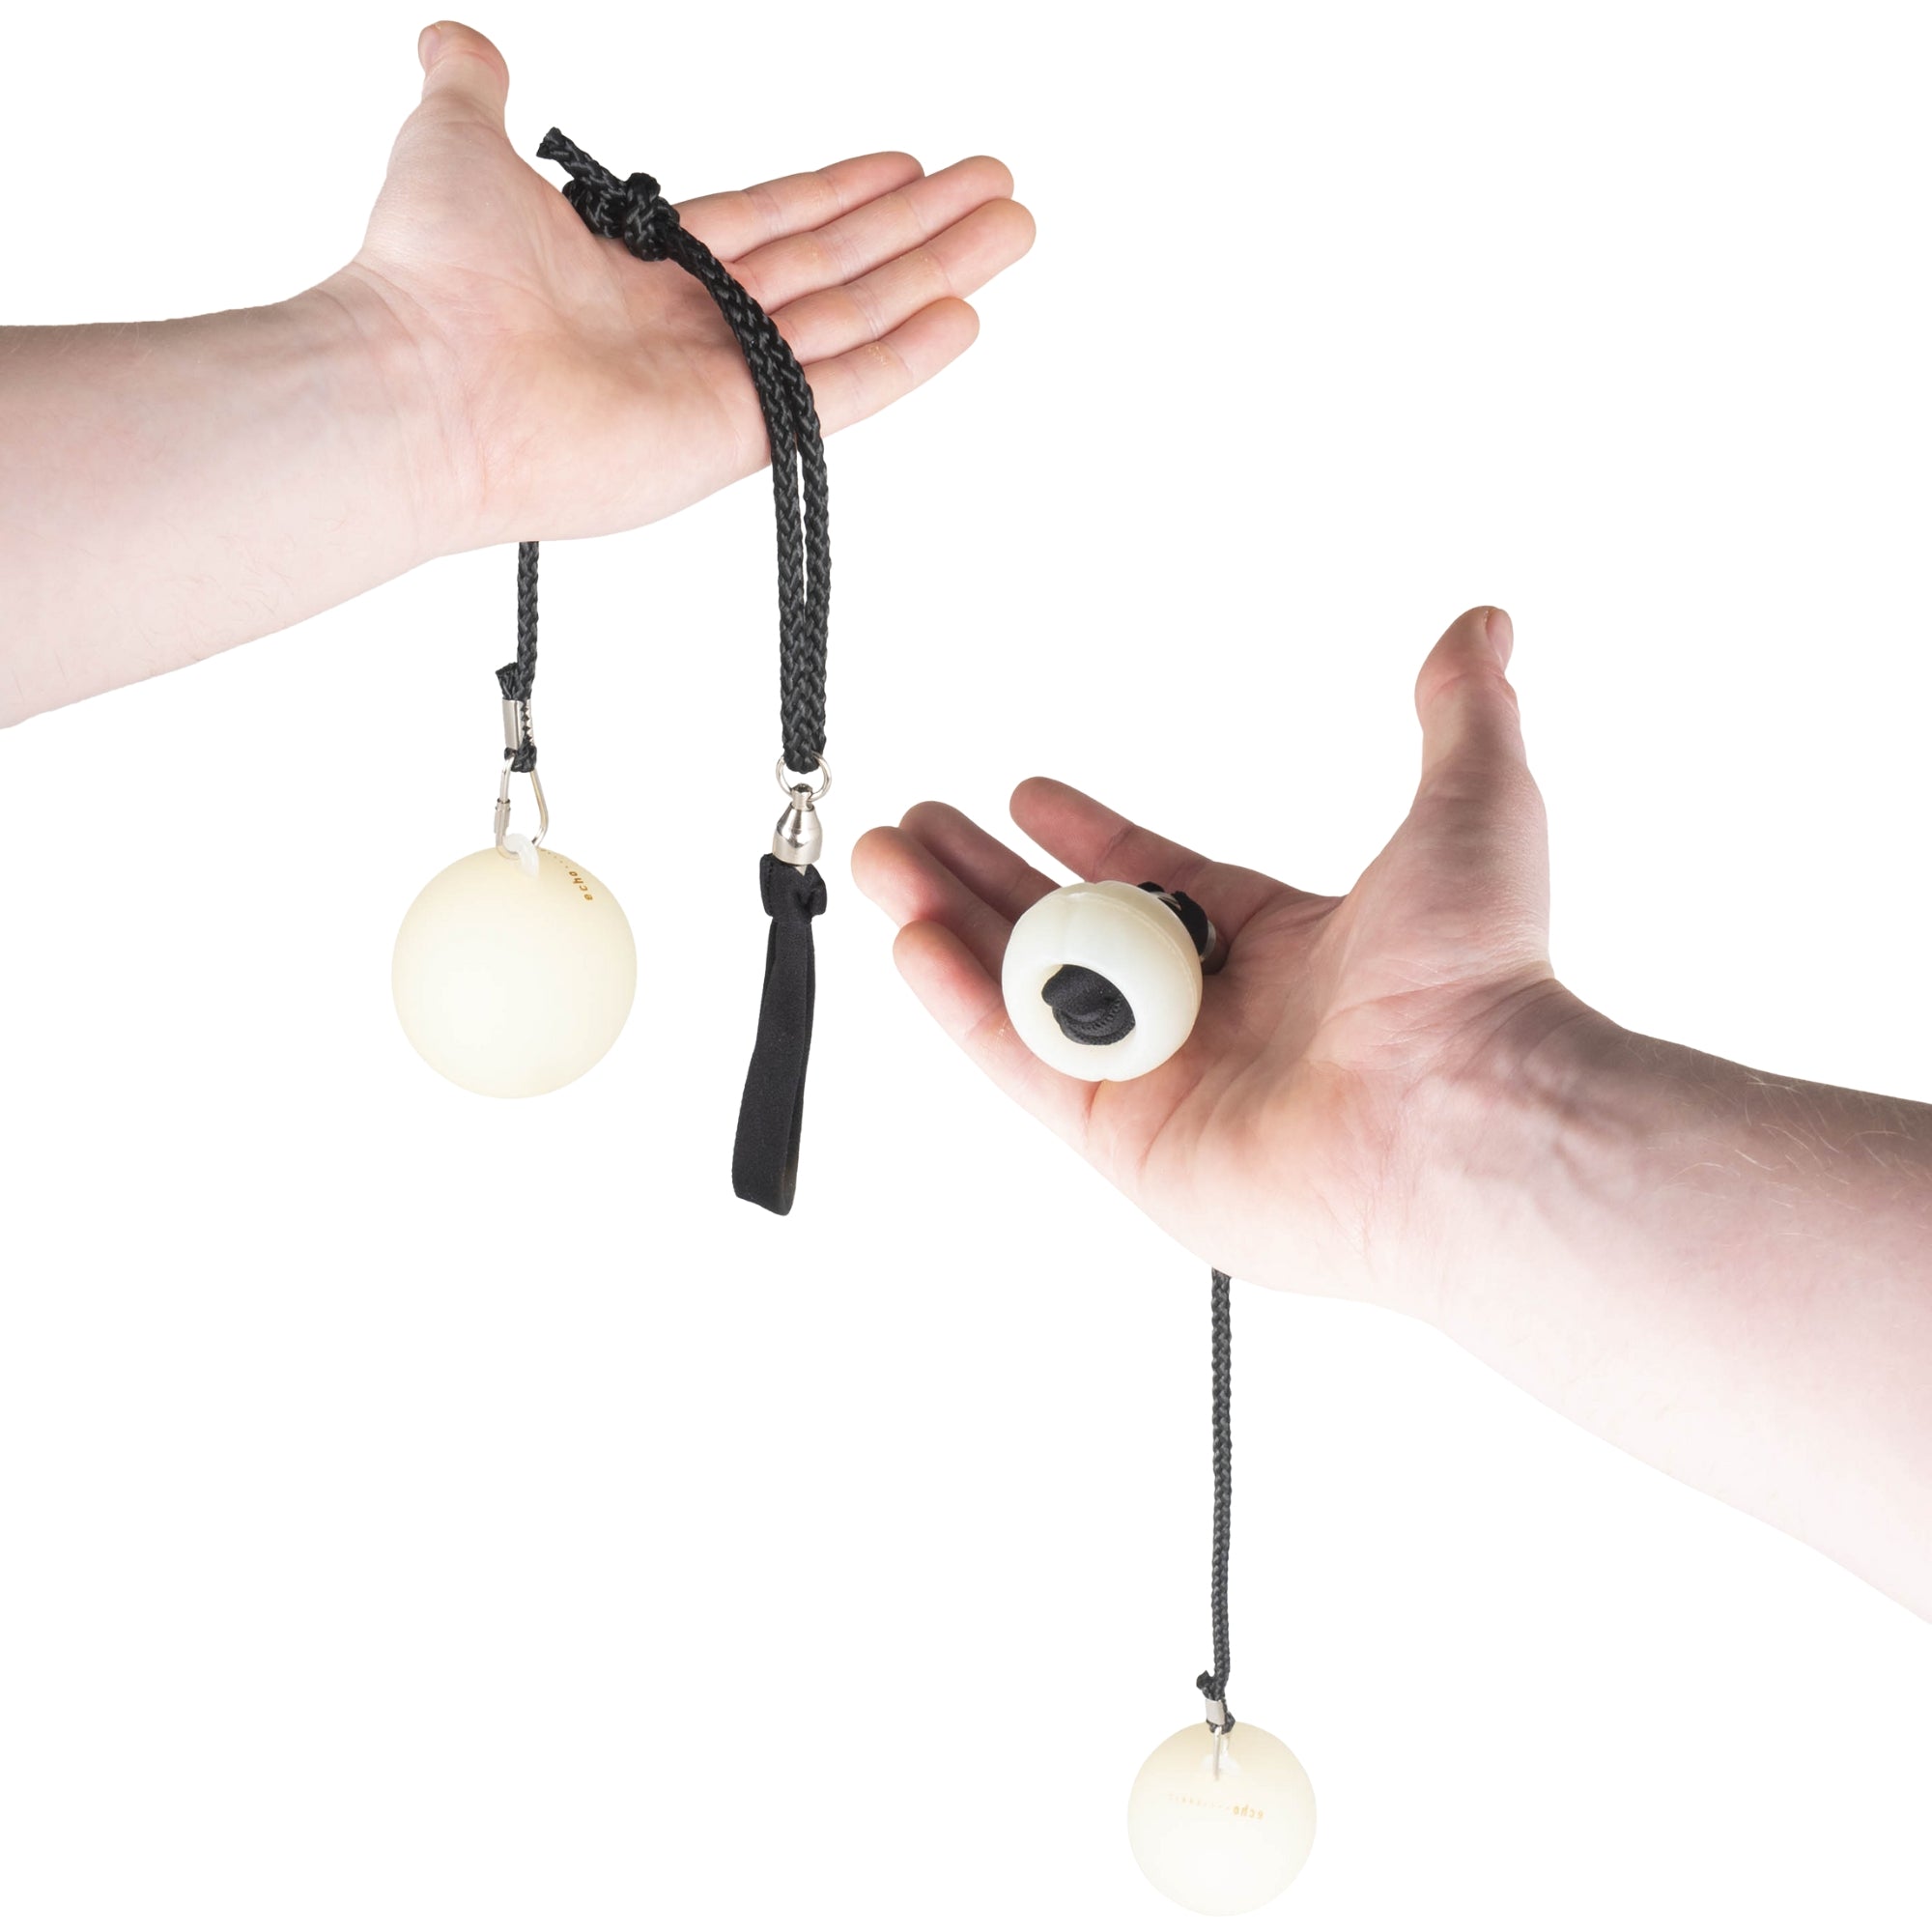 one poi with loop handle and one with knob handle